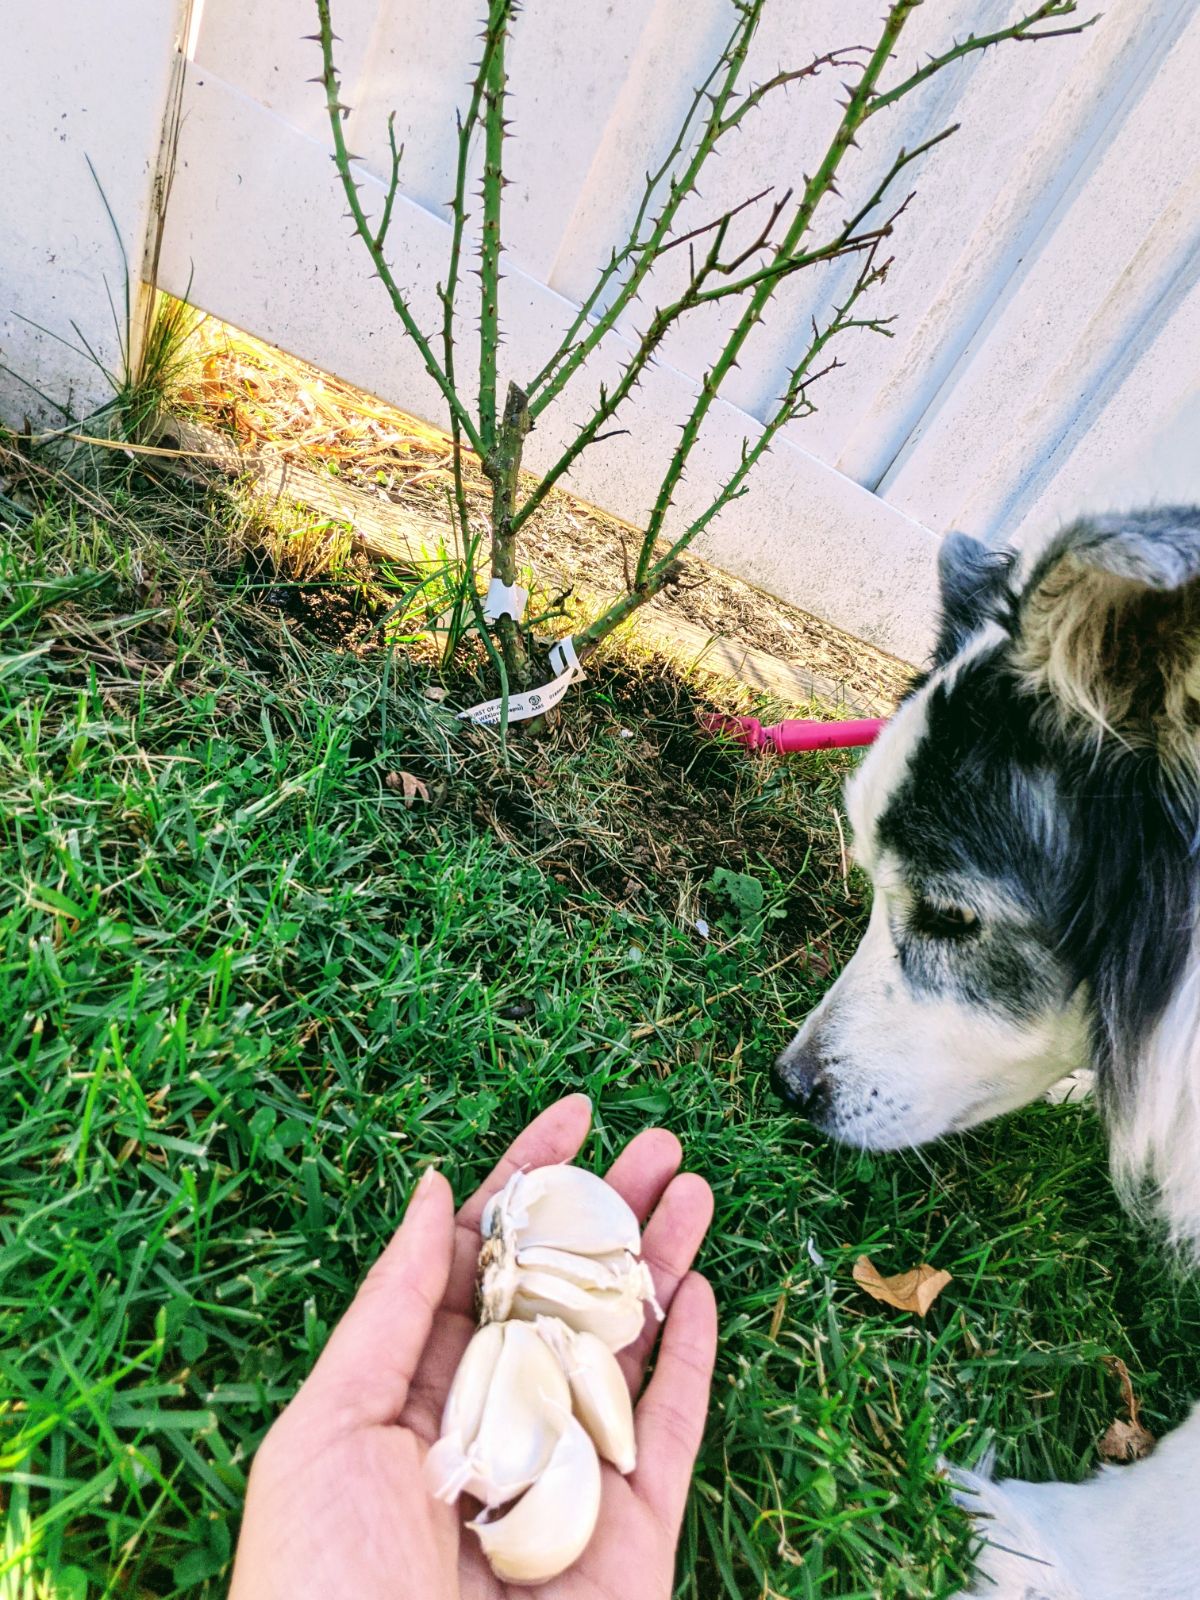 Border Collie sniffing around near a rosebush and a hand holding garlic cloves